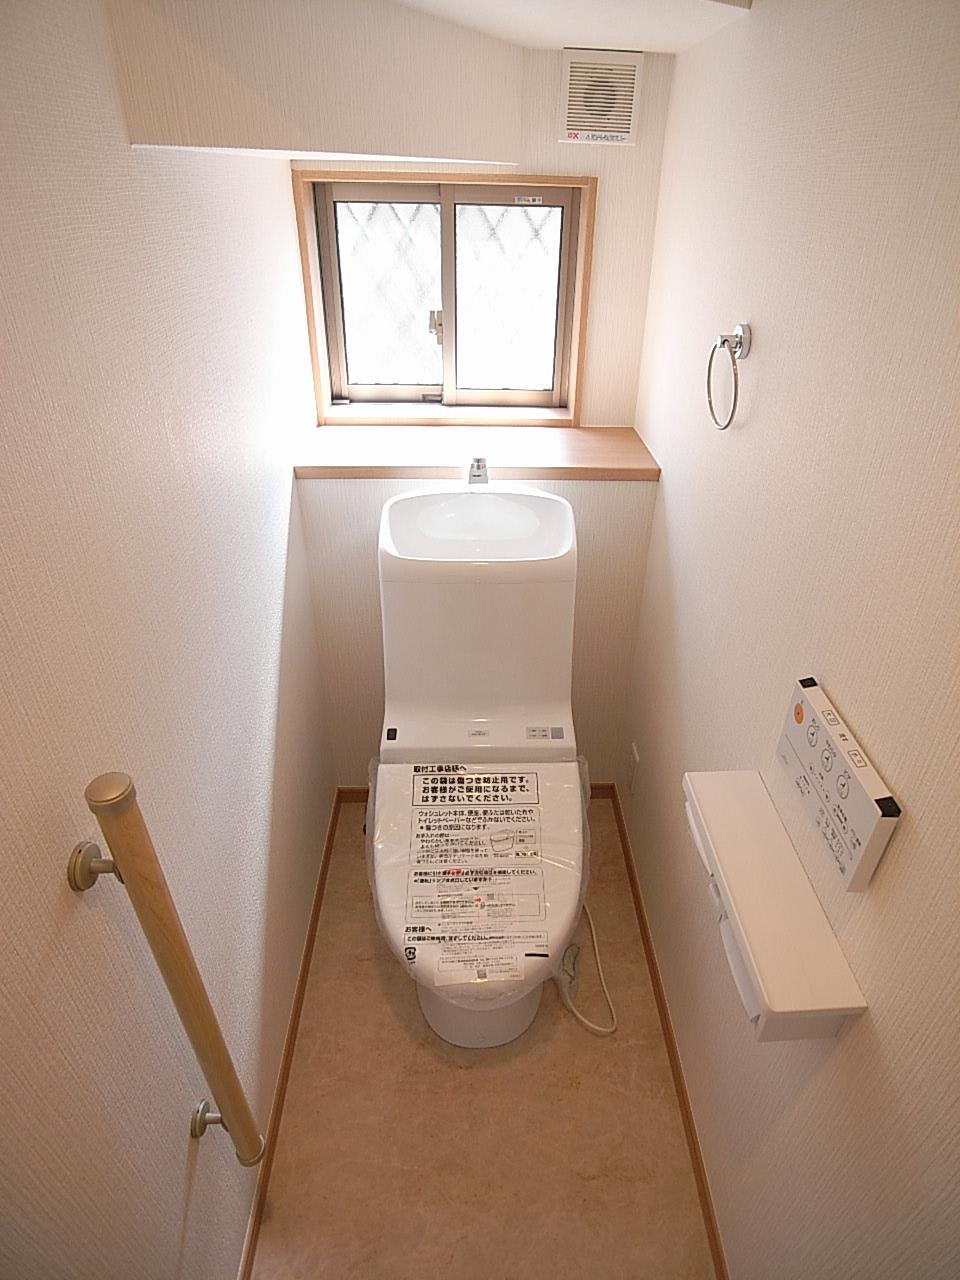 Toilet. Both the first and second floors is a bidet type